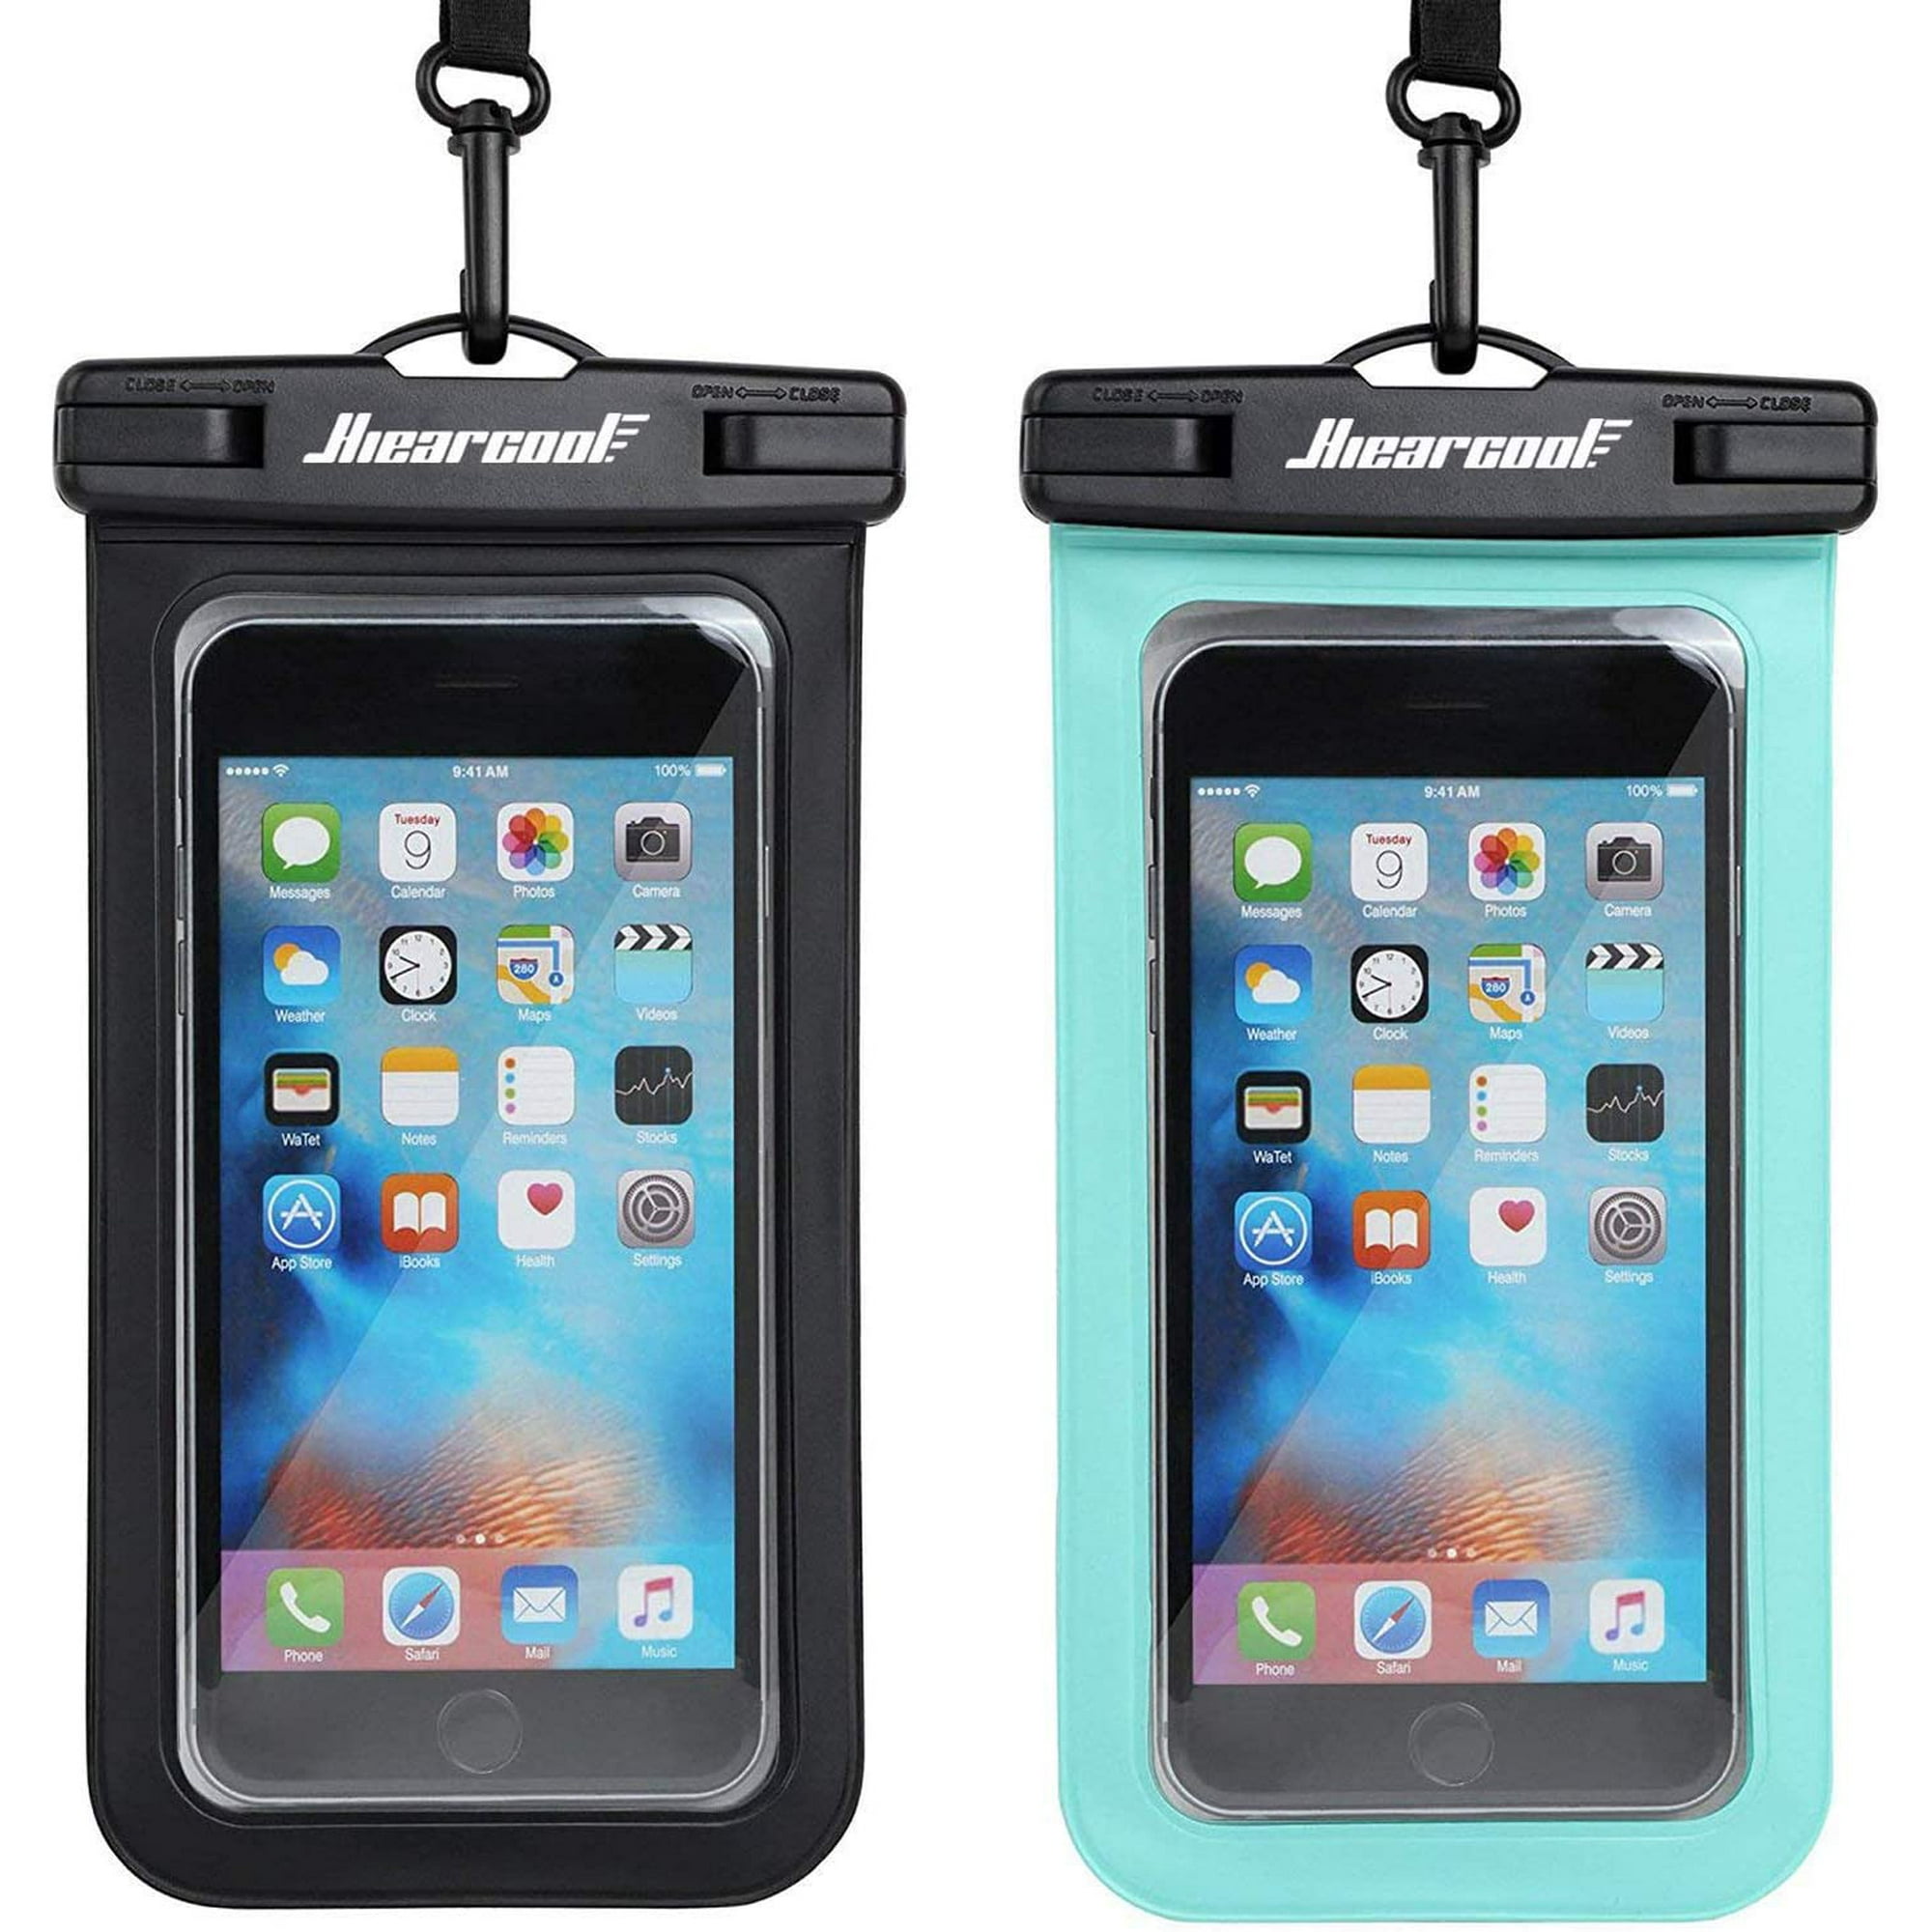 Universal Waterproof Case,Waterproof Phone Pouch Compatible for iPhone 12  Pro 11 Pro Max XS Max XR X 8 7 Samsung Galaxy s10/s9 Google Pixel 2 HTC Up  to 7.0\